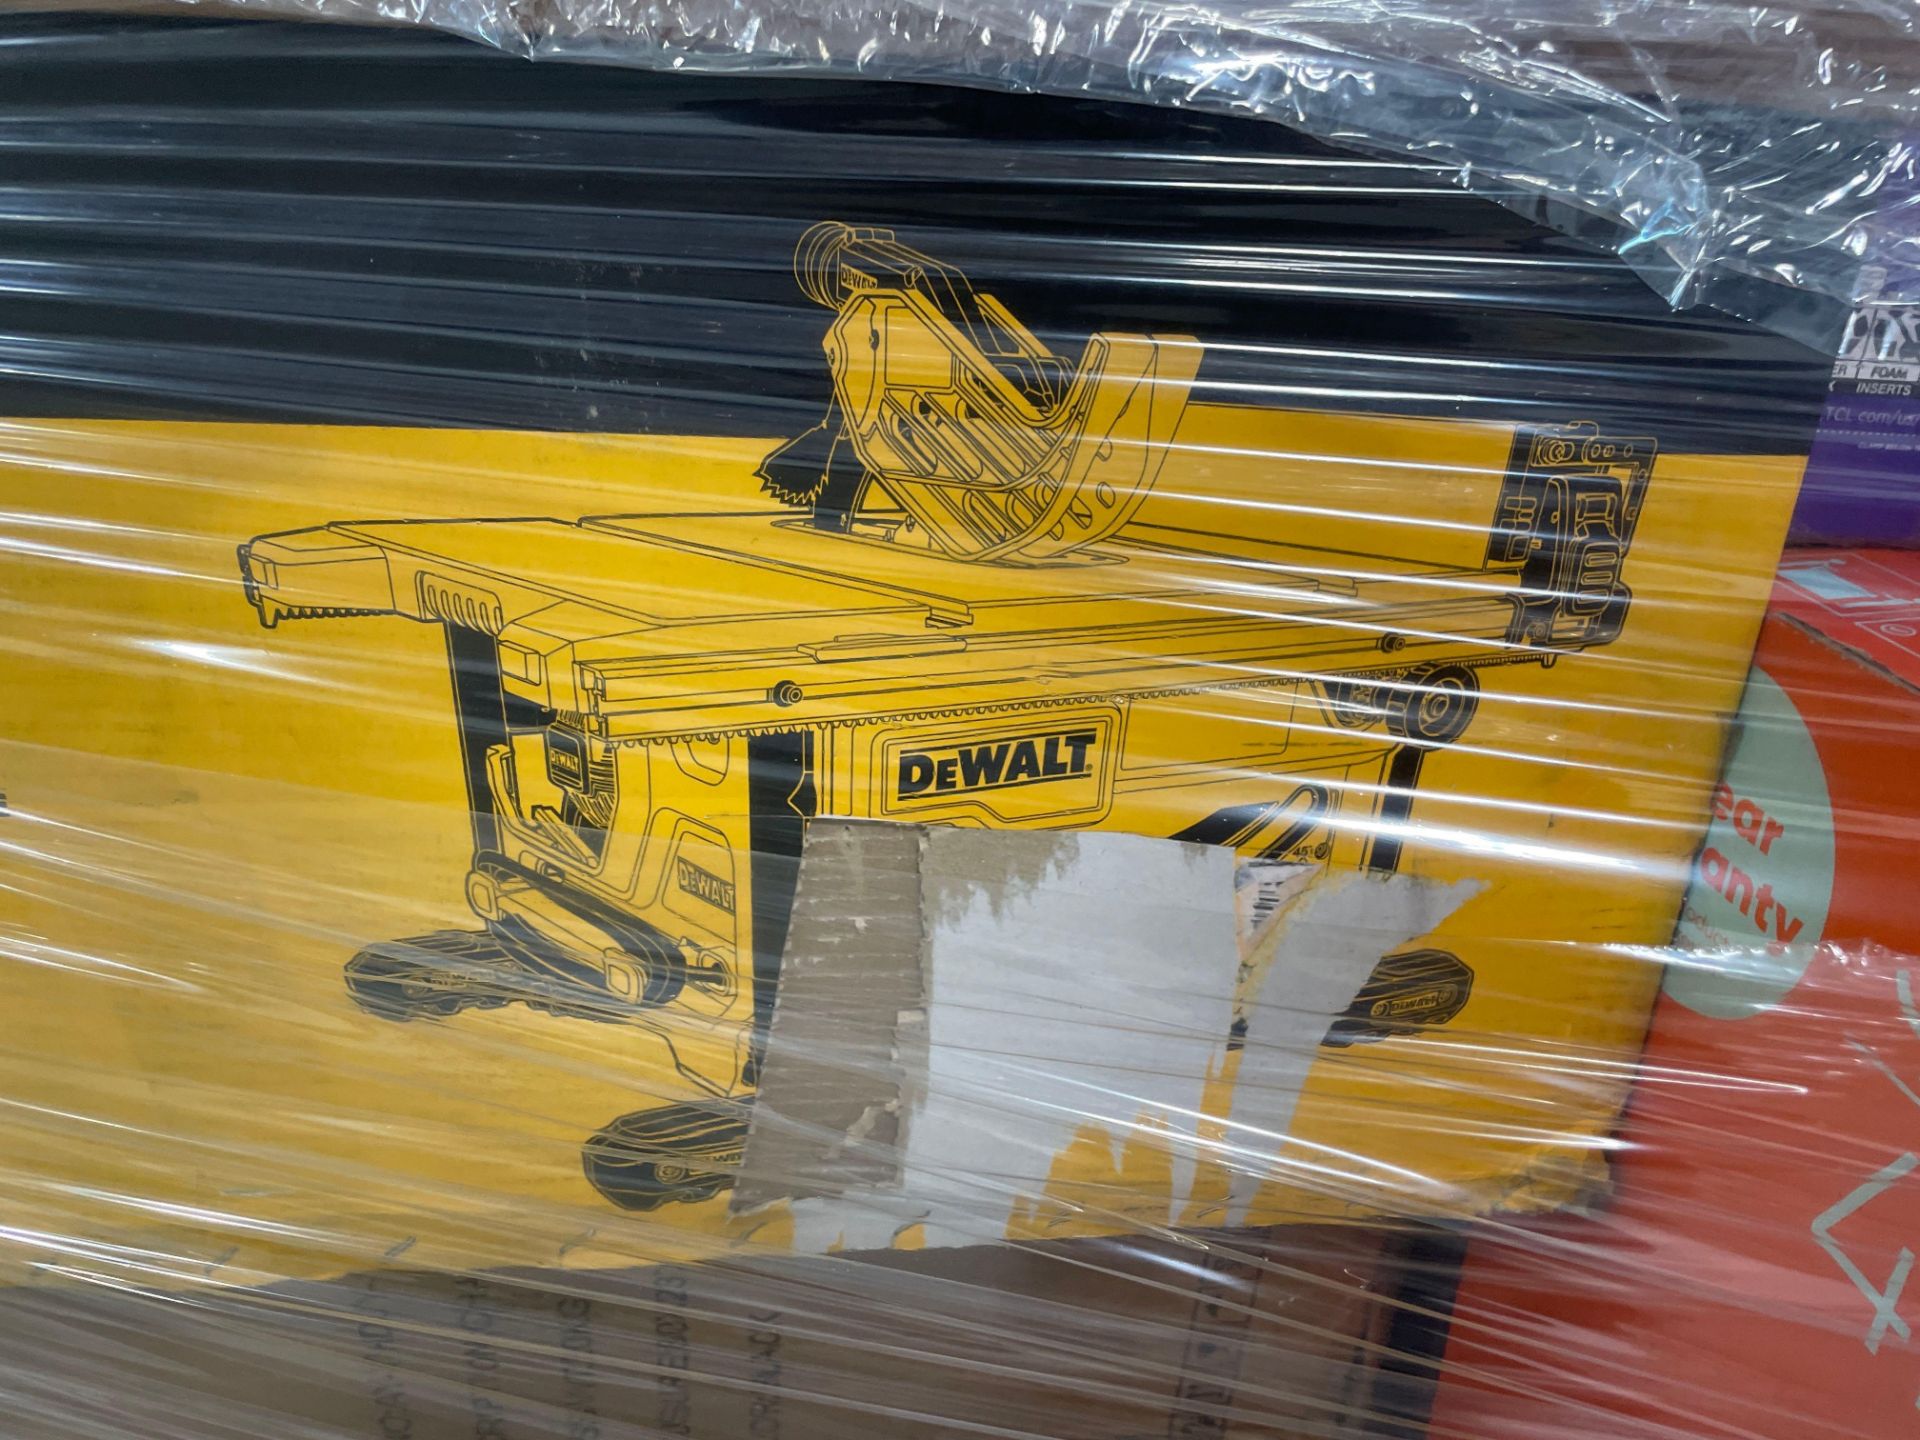 Dewalt Table saw and more